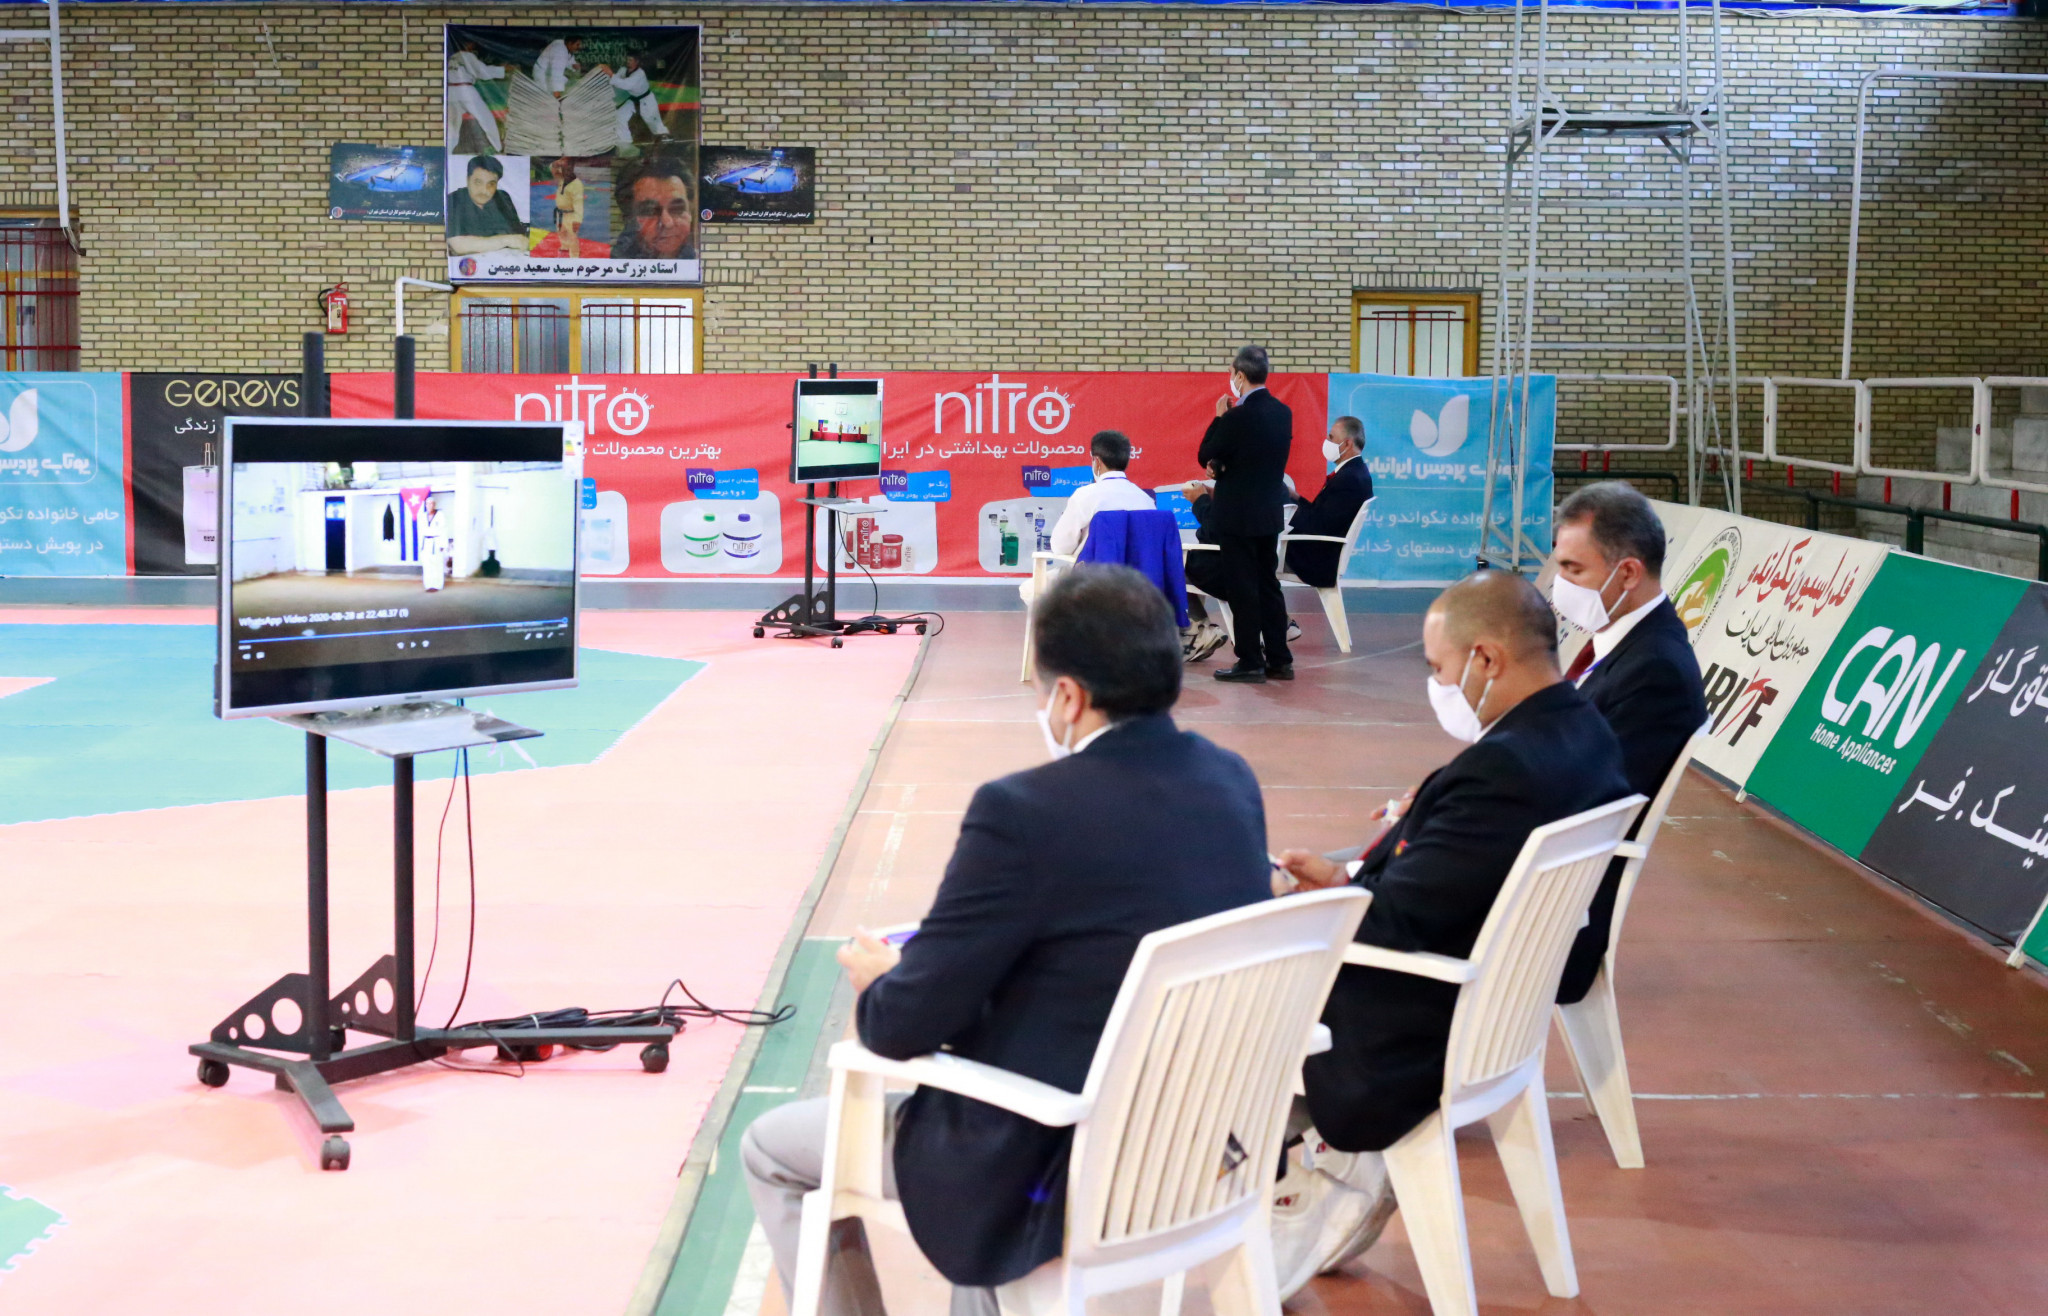 Judges watched the performances on a screen ©IRITF